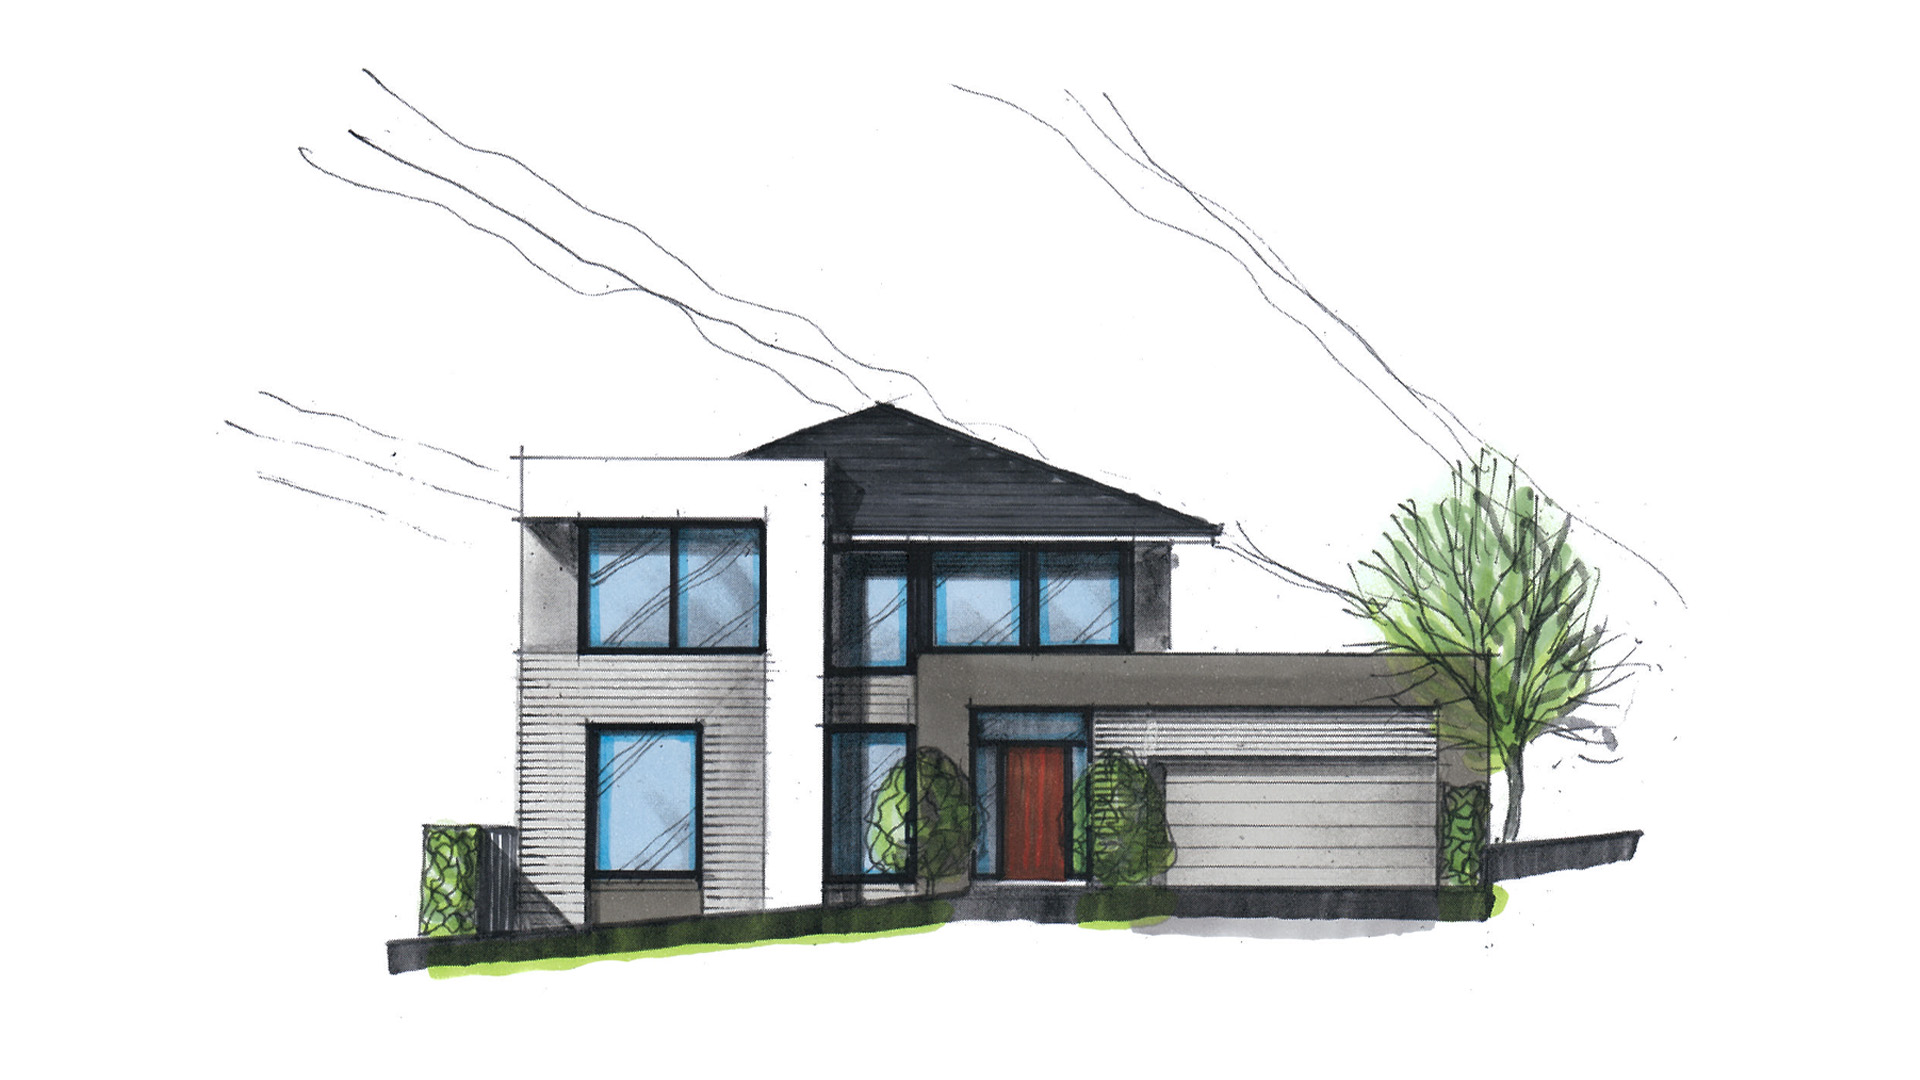 A coloured sketch of the Englehart Balwyn residence, as seen from the front.